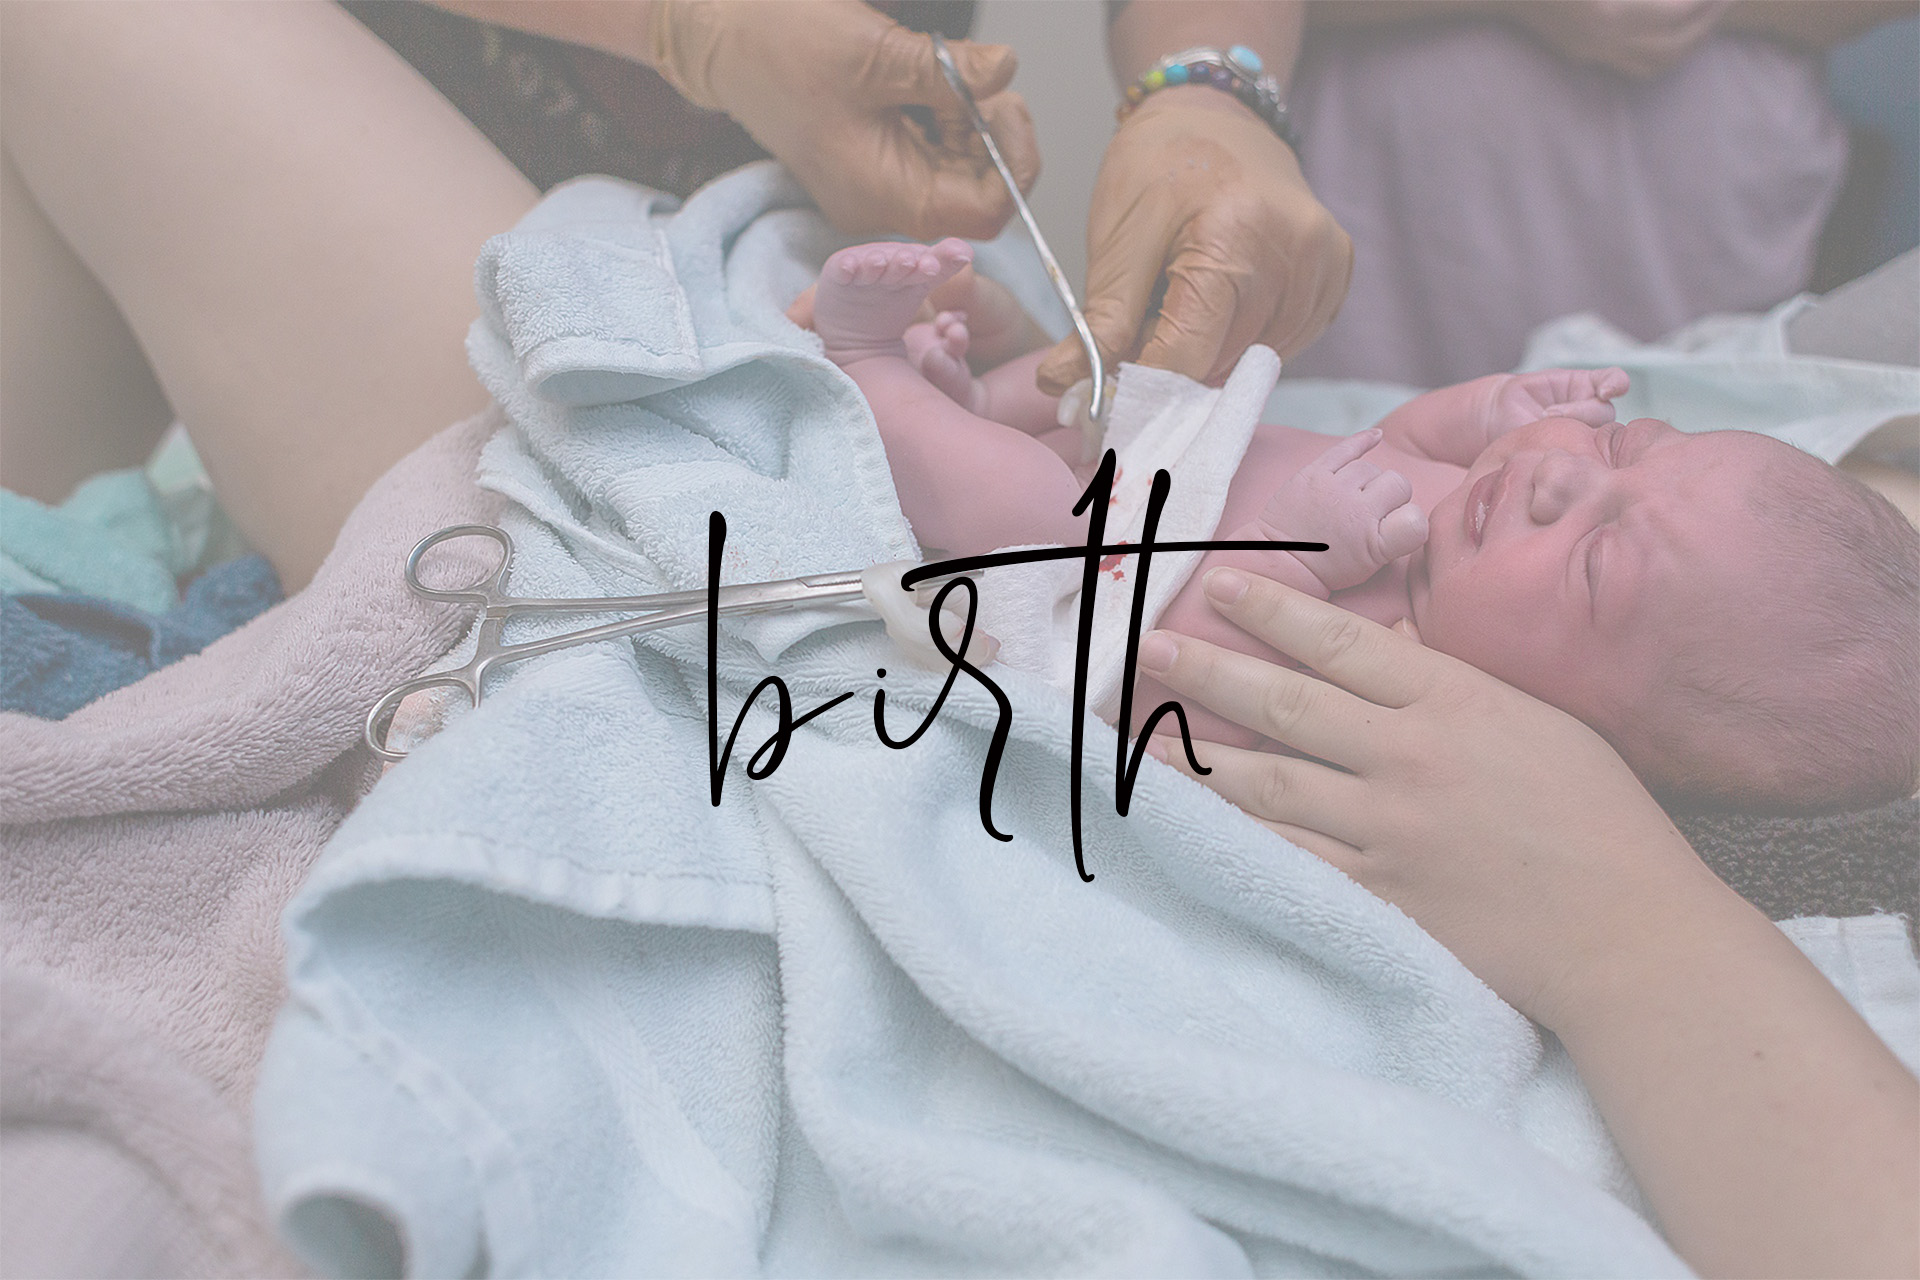 Utah Birth Photographer and Videographer, Doula - Kaitlyn McEntire